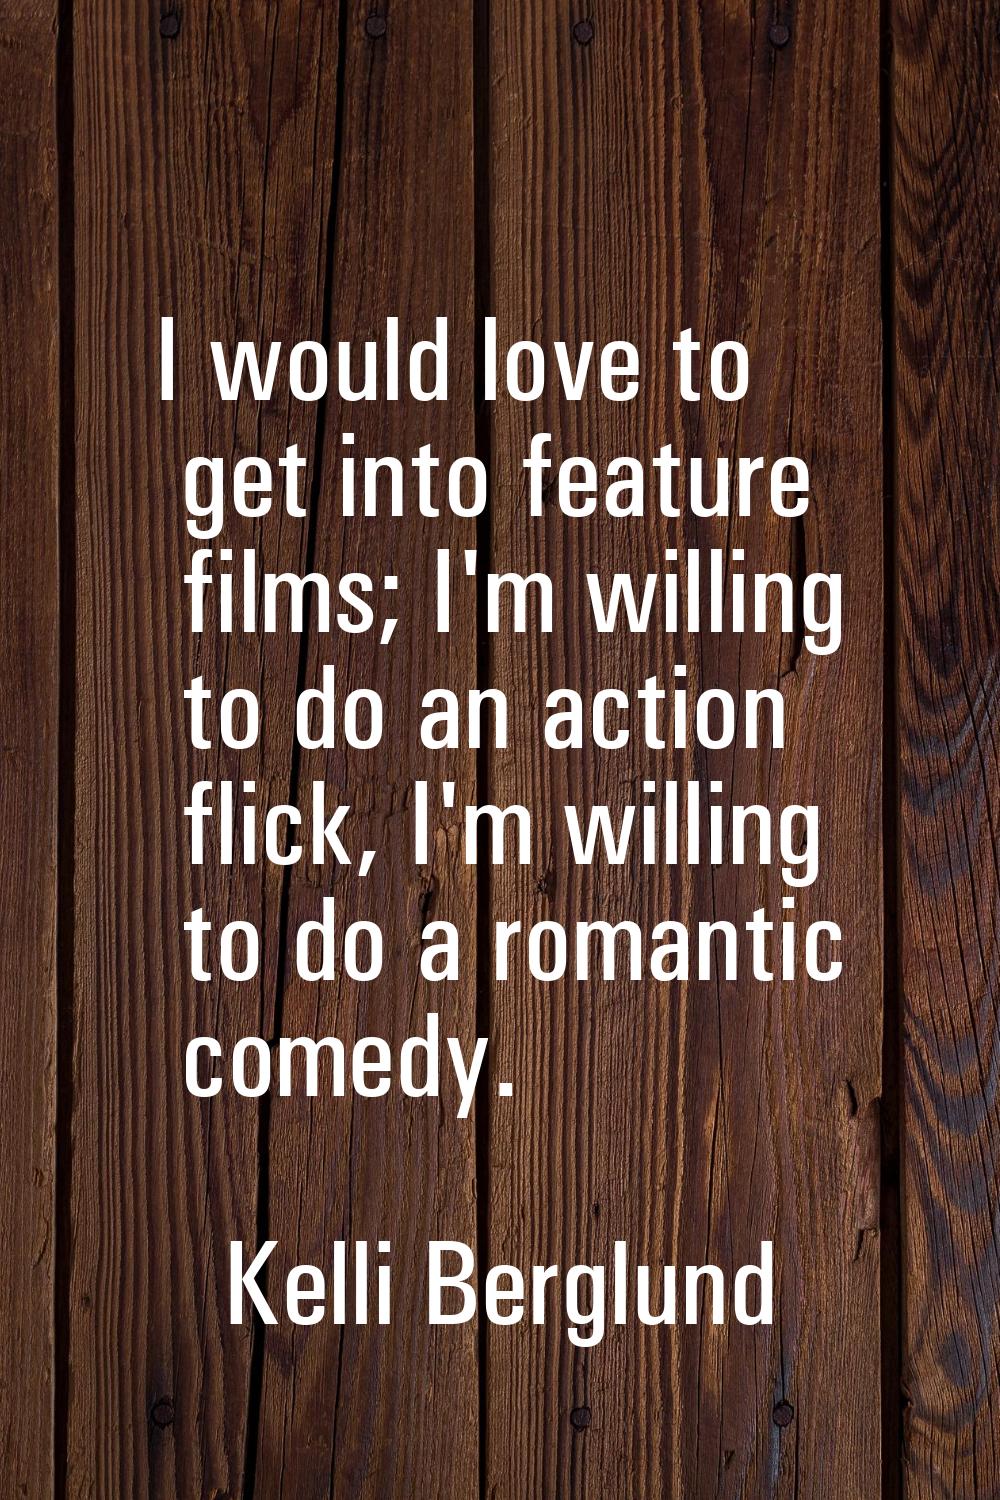 I would love to get into feature films; I'm willing to do an action flick, I'm willing to do a roma